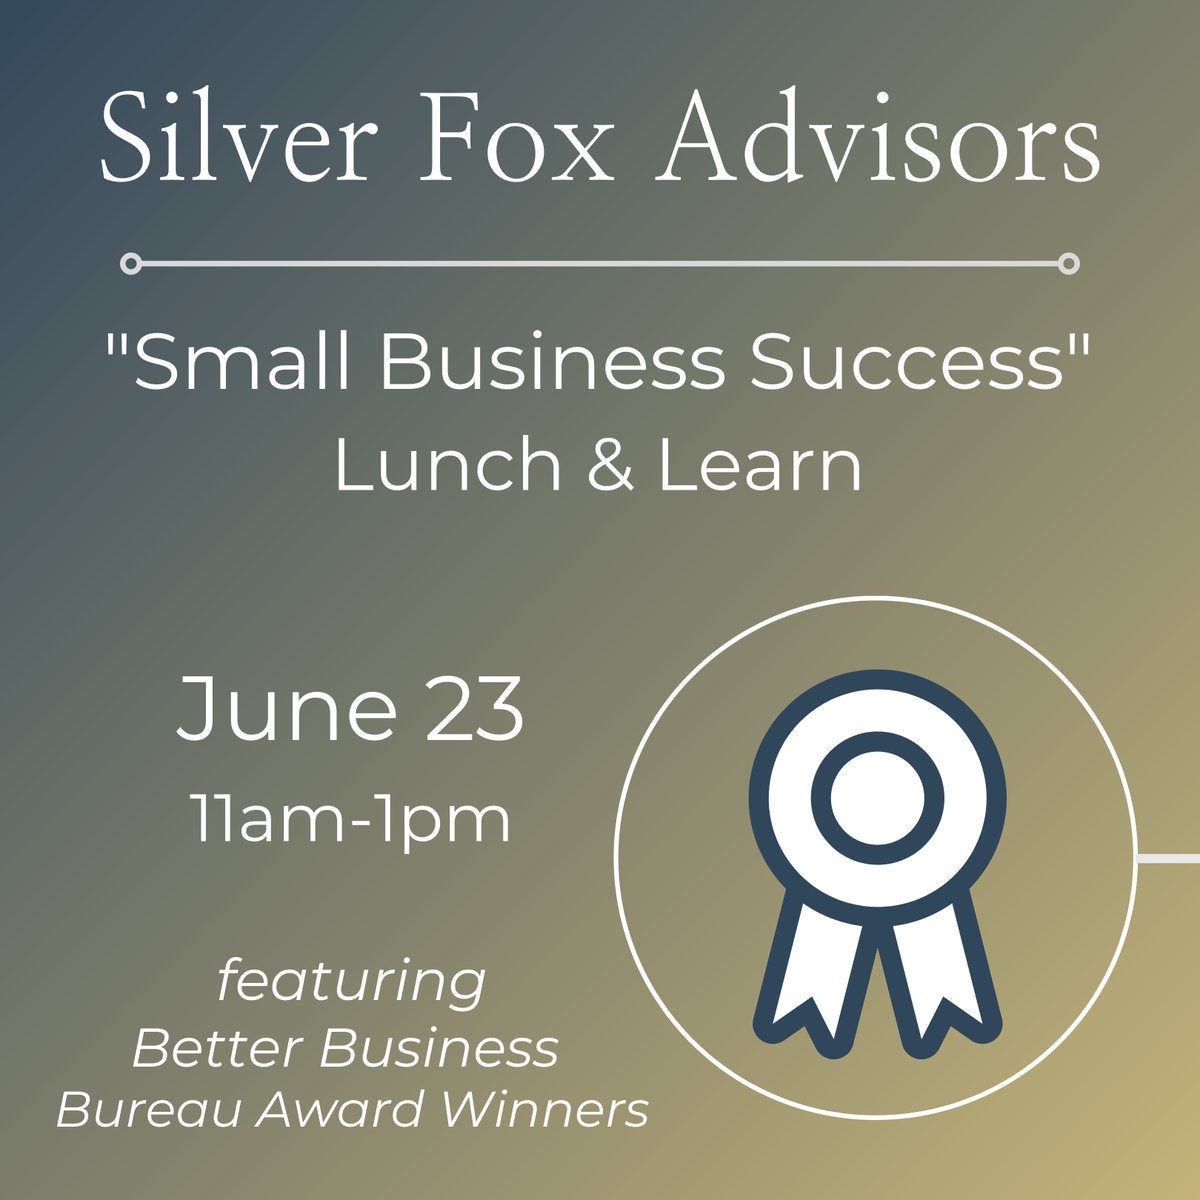 Expand your knowledge & network! This week, you have the opportunity to learn from the best. The Silver Fox Advisors' monthly Lunch & Learn will feature BBB award winners, including Dan Parsons and Hank Moore.   Bring your questions!  Click here for more. silverfox.org/events/